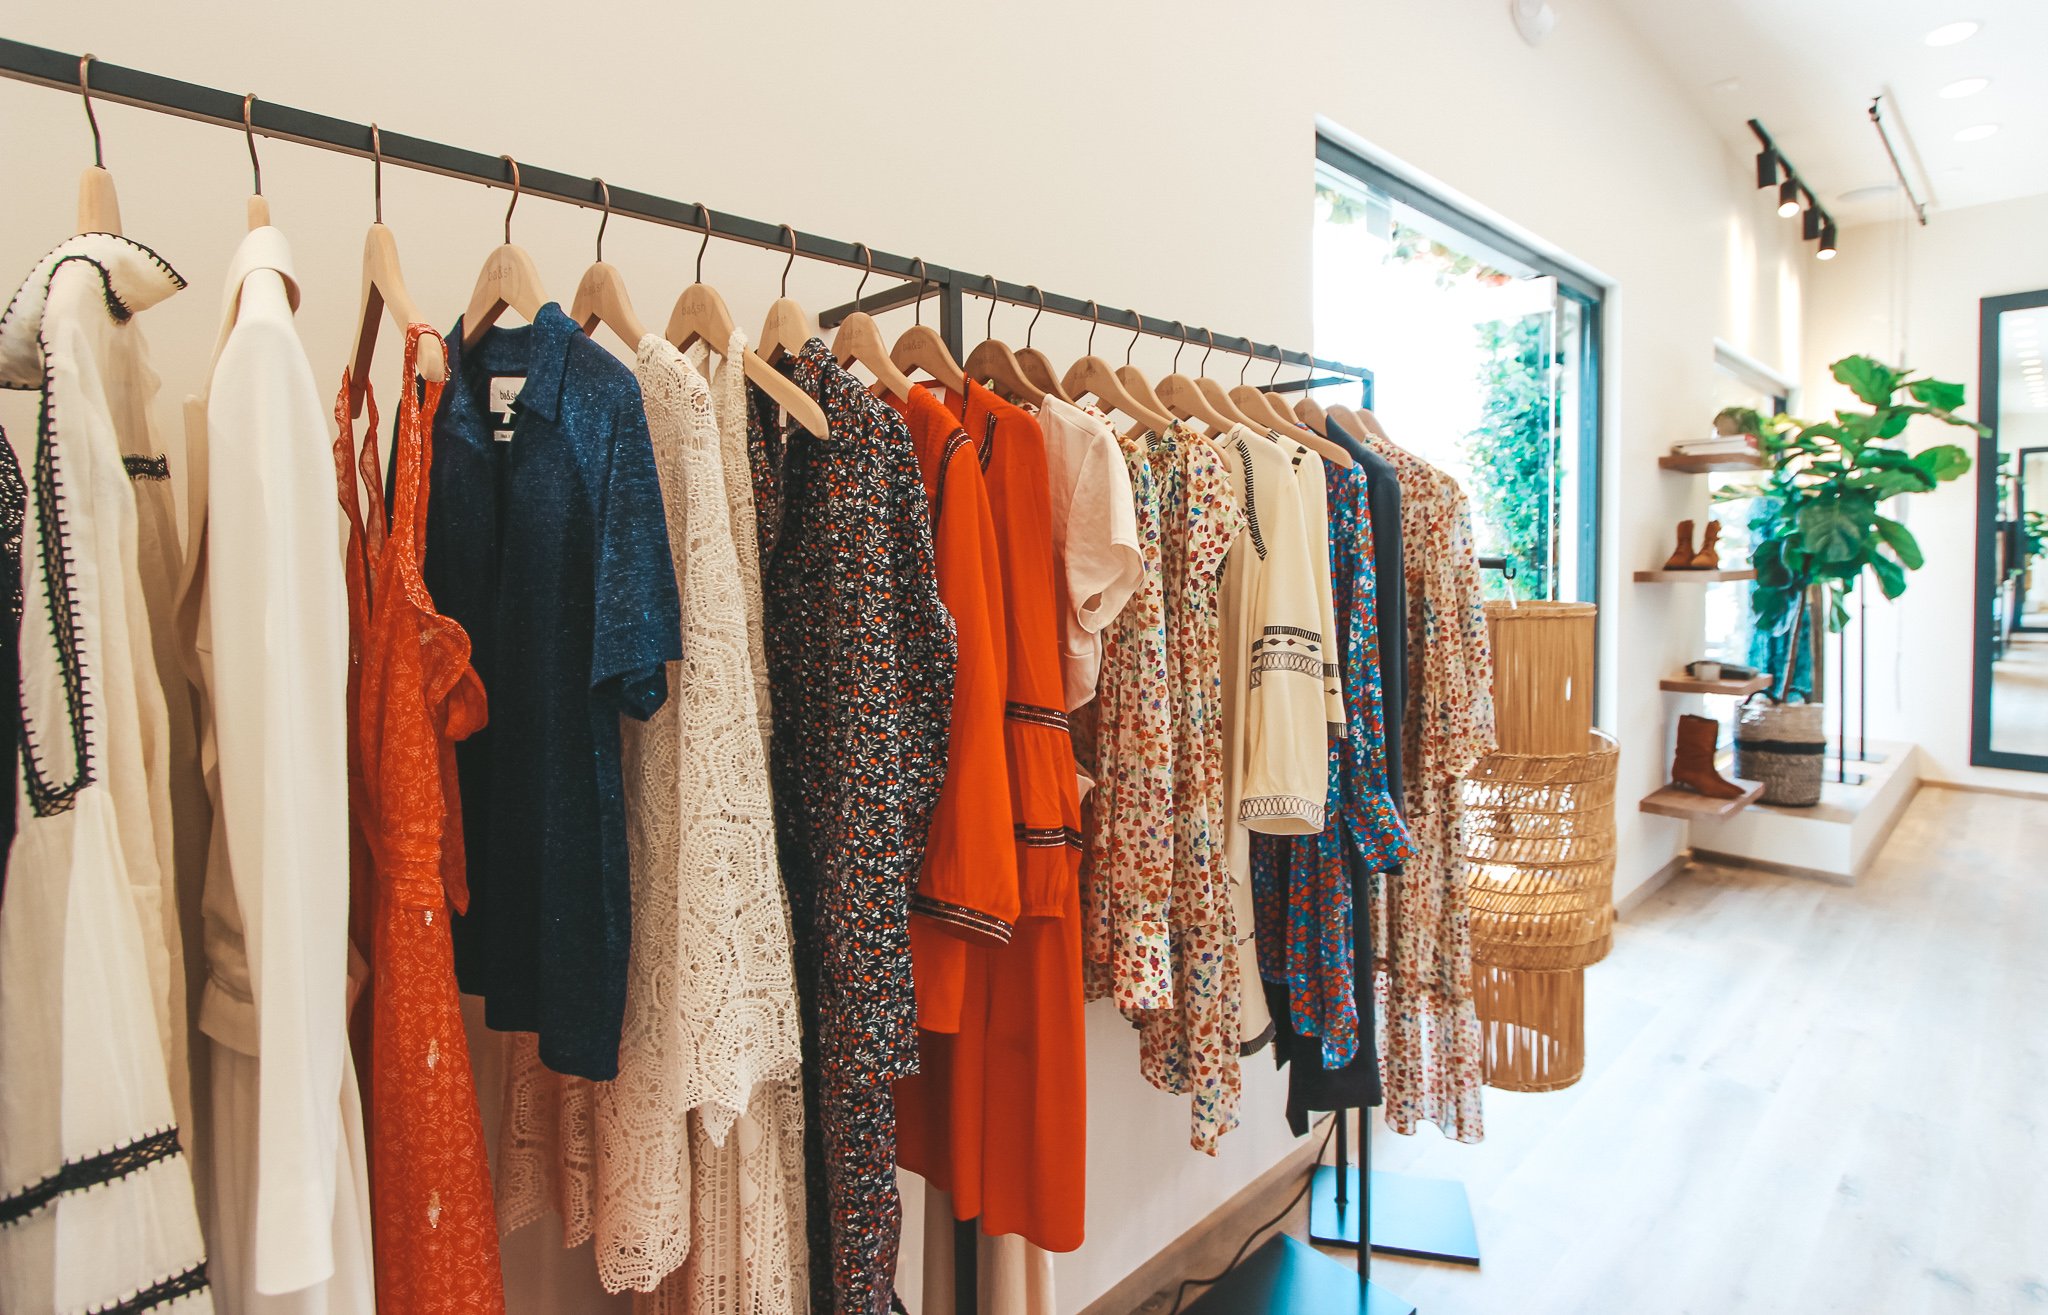 Malibu Country Mart - ba&sh is now open for in-store shopping at Malibu  Country Mart! They are currently offering 50% off nearly the entire Summer  2020 collection including perfect picnic dresses, breezy